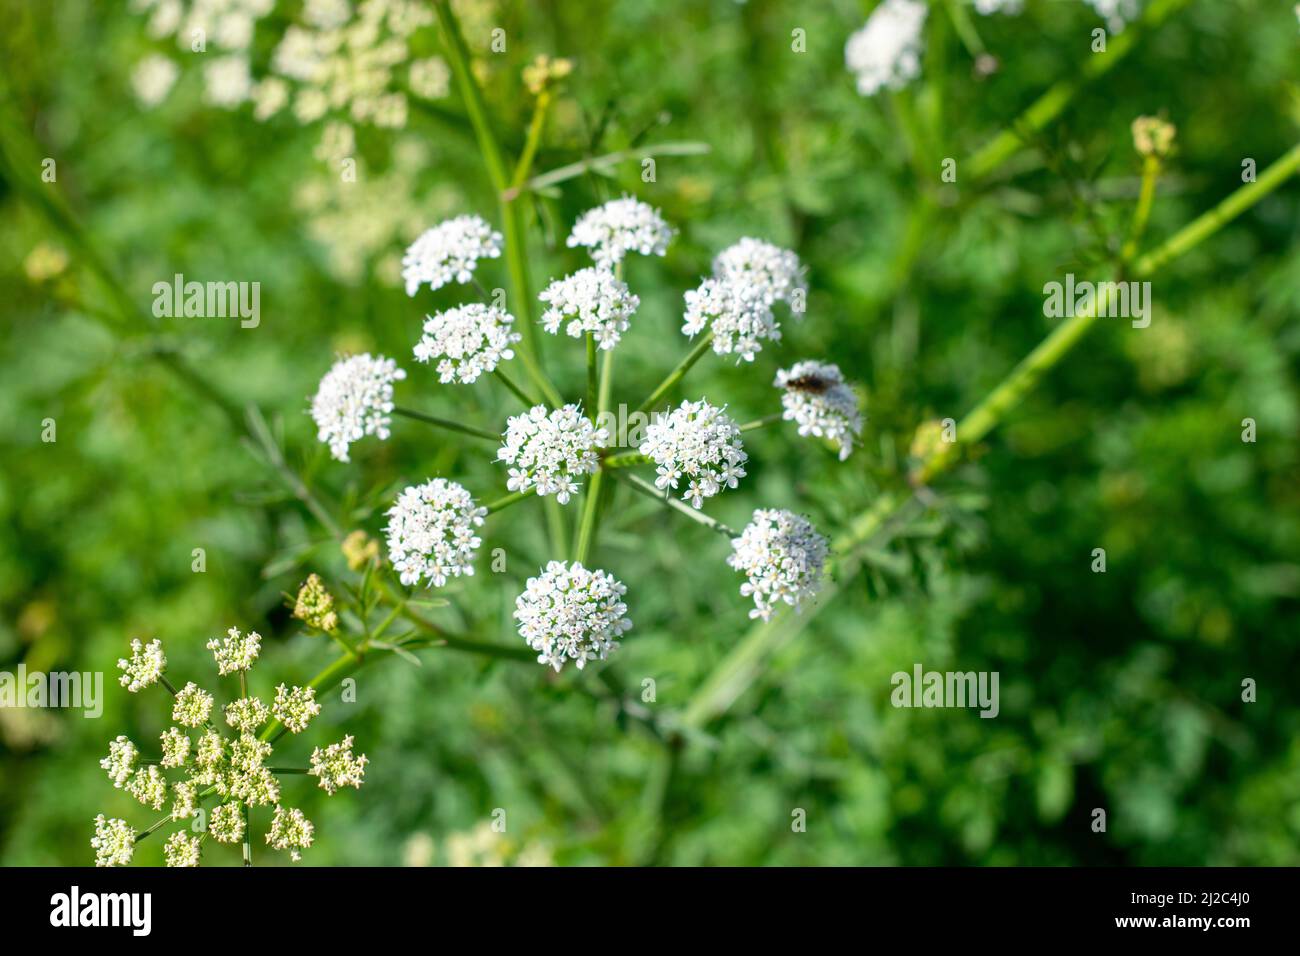 Water-hemlock (Oenanthe crocata), also known as dead man's fingers, a flowering plant in the carrot family, Apiaceae. Toxic plants. Stock Photo